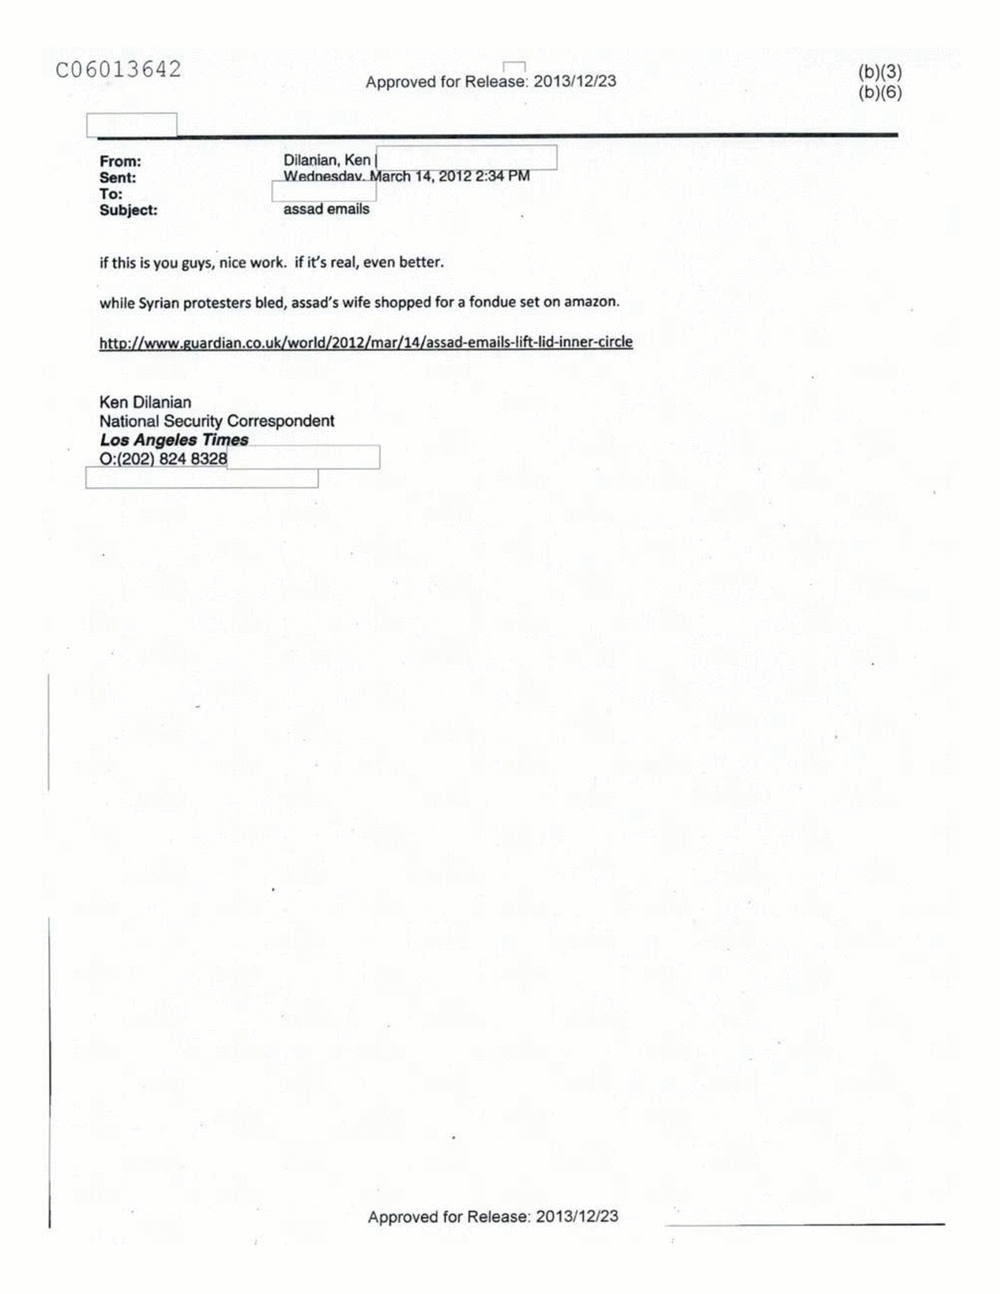 Page 483 from Email Correspondence Between Reporters and CIA Flacks